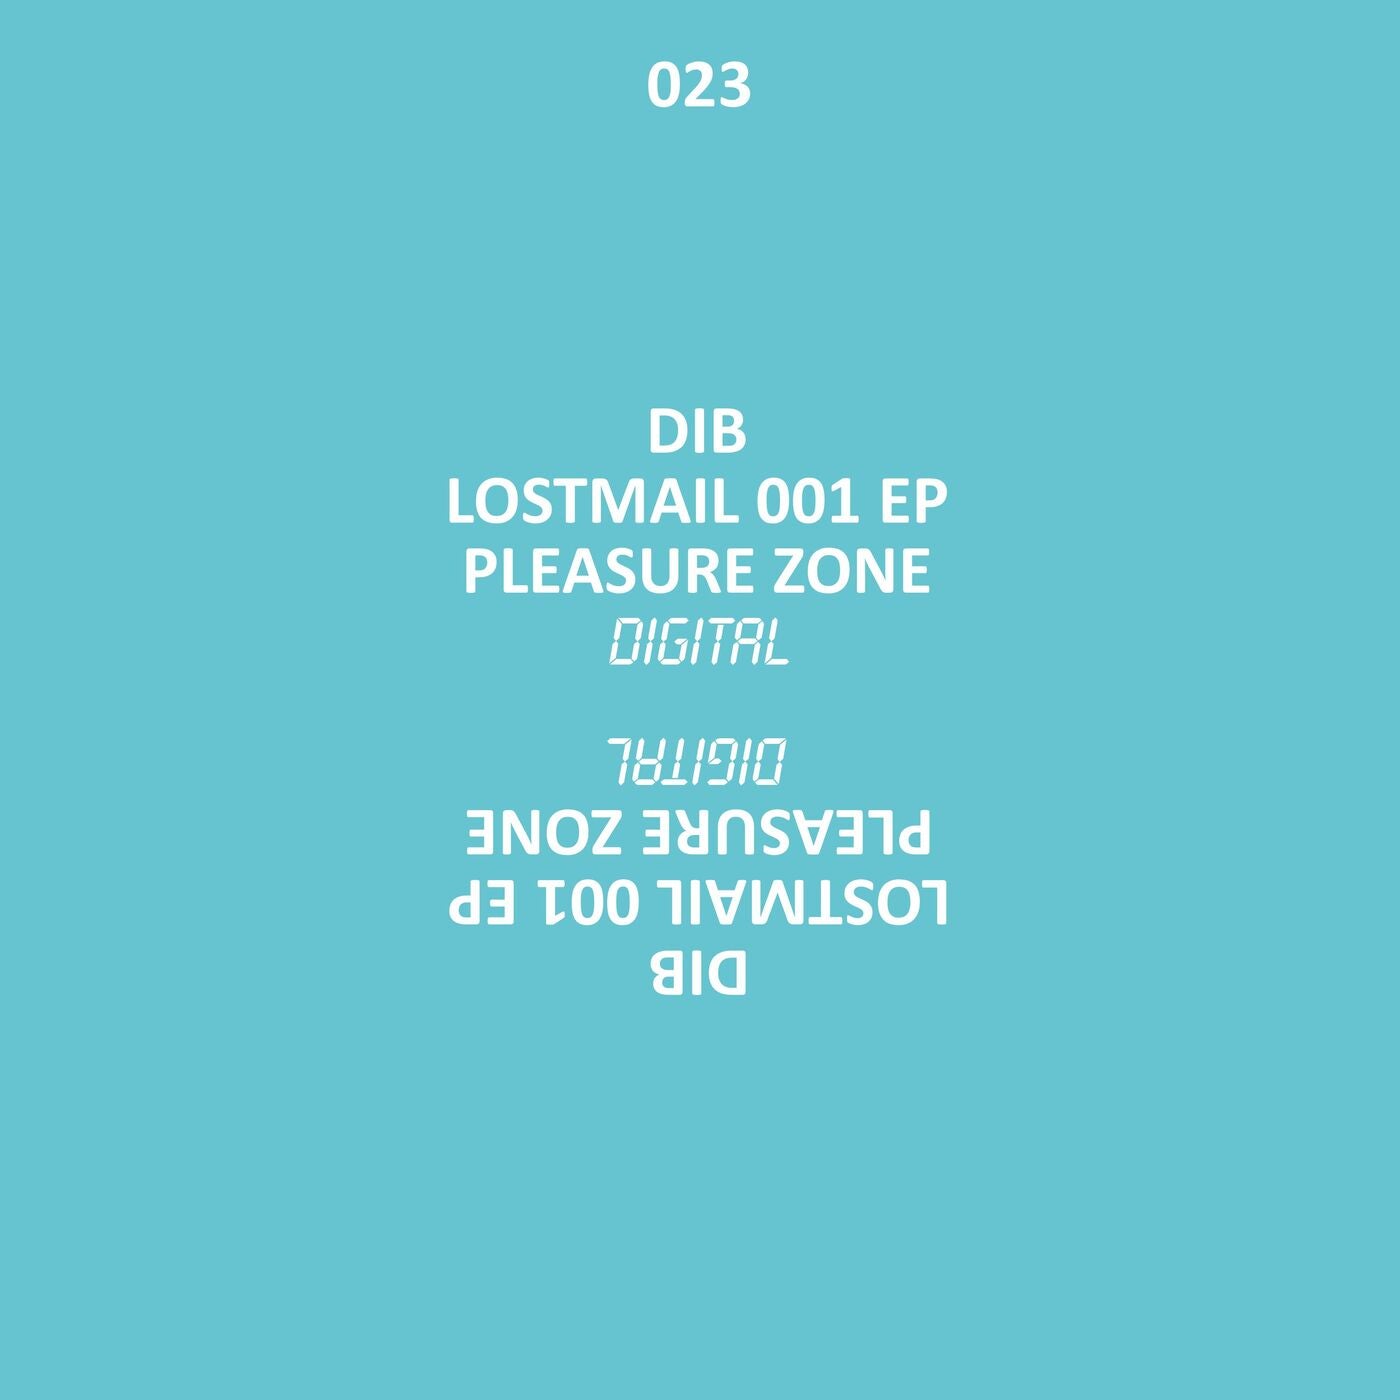 Lostmail 001 EP